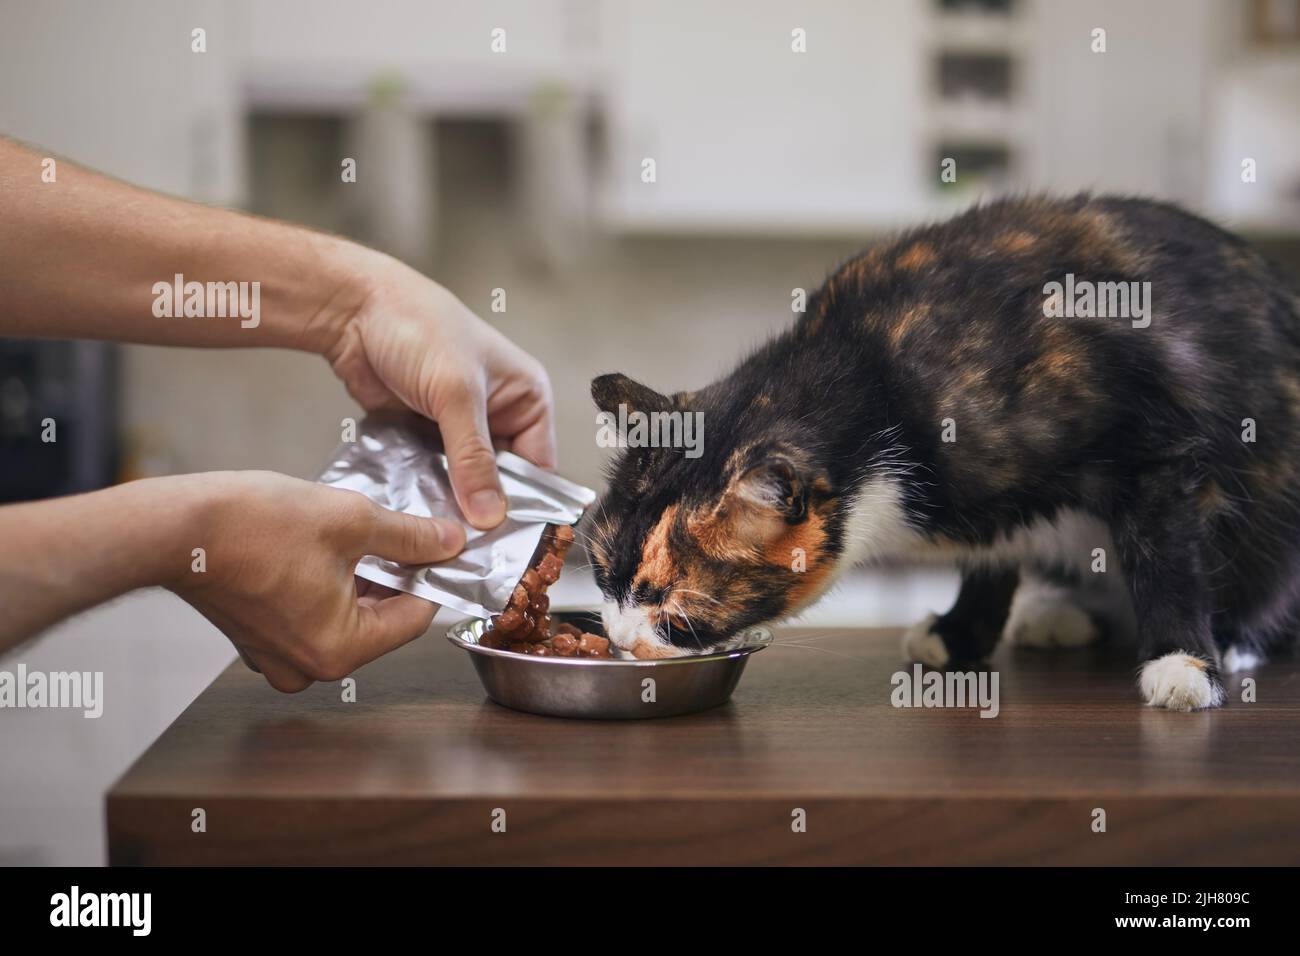 Domestic life with pet. Man feeding his hungry cat at home. Stock Photo